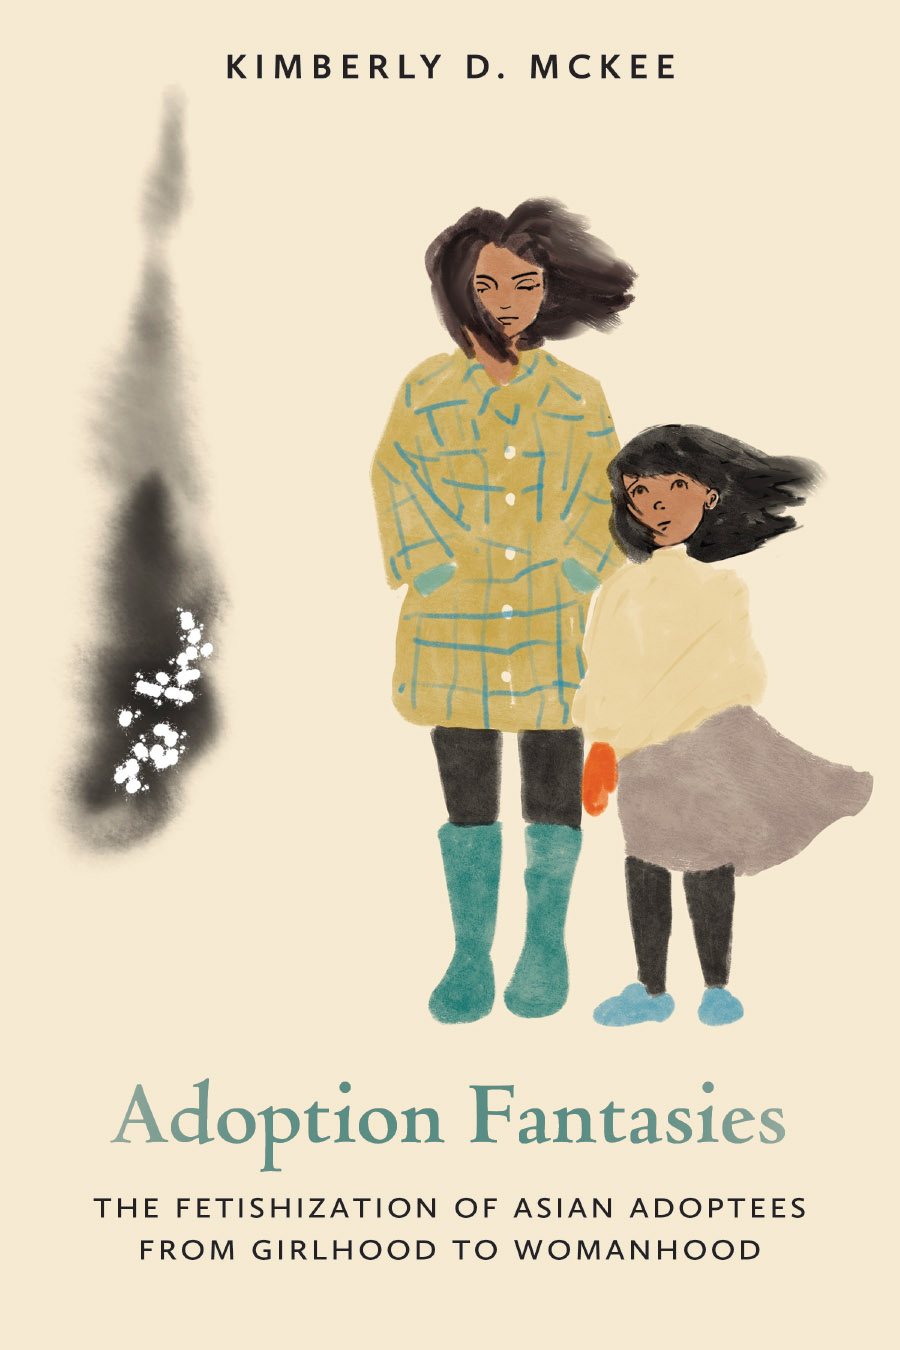 Front cover of Adoption Fantasies: The Fetishization of Asian Adoptees from Girlhood to Womanhood by Kimberly D. McKee, featuring an illustration of an Asian woman and young girl, their hair blowing in the wind, an evocative black shape with sparkles nearby.